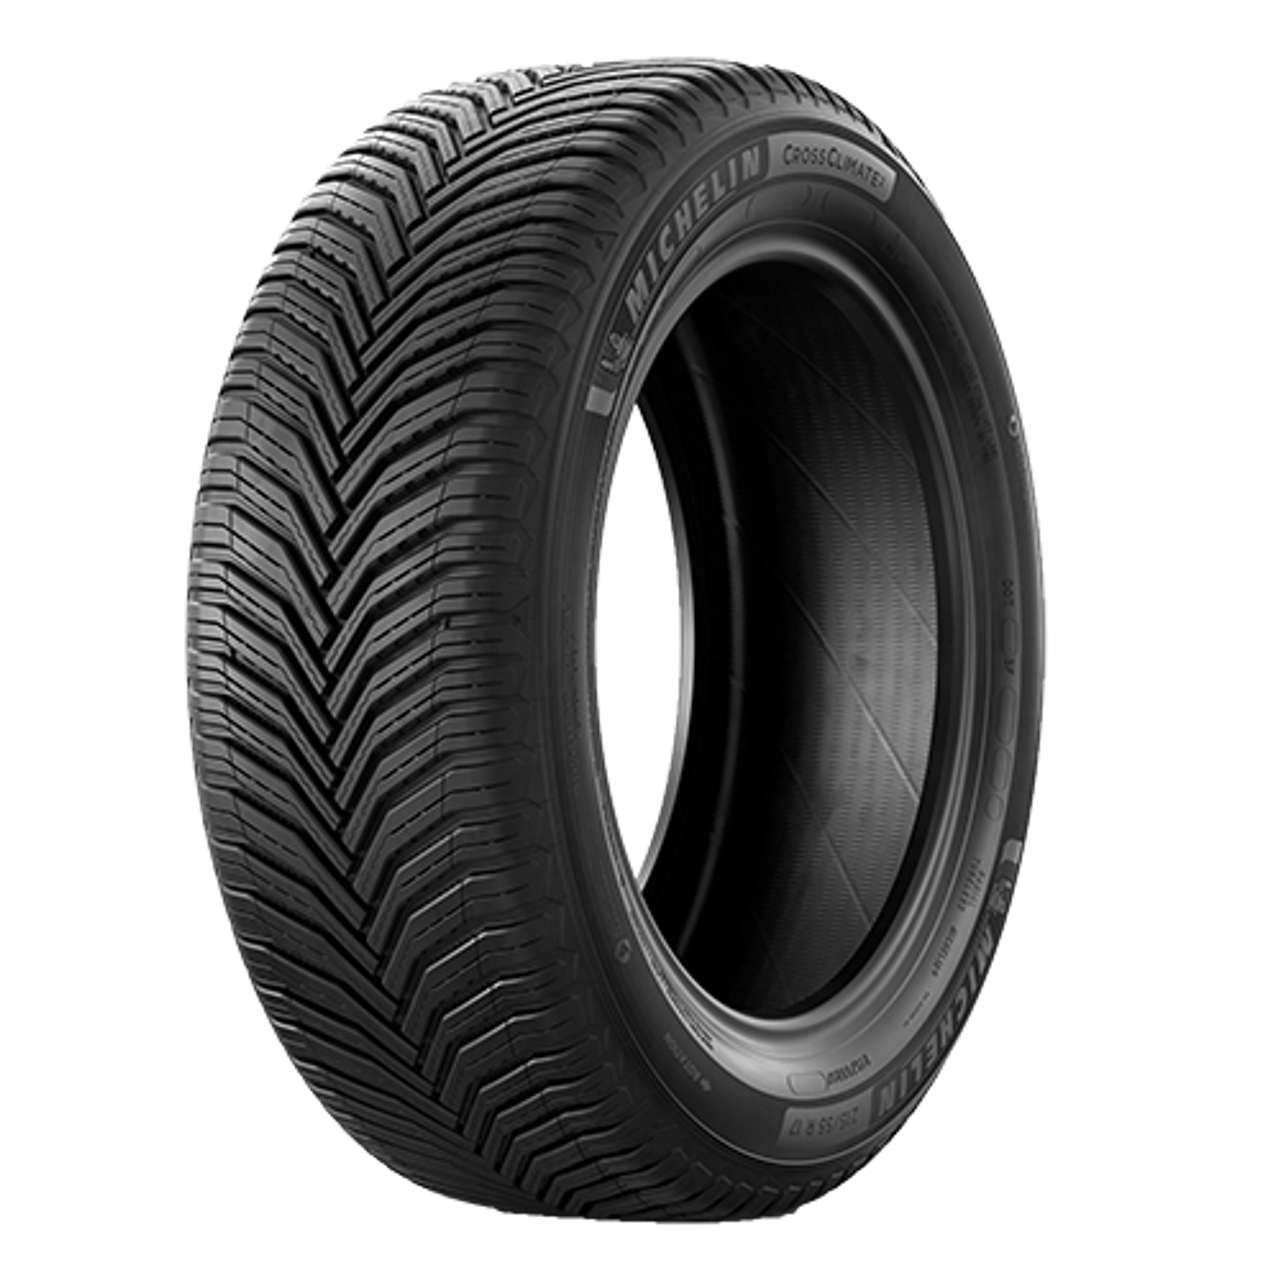 MICHELIN CROSSCLIMATE 2 185/55R16 83V BSW